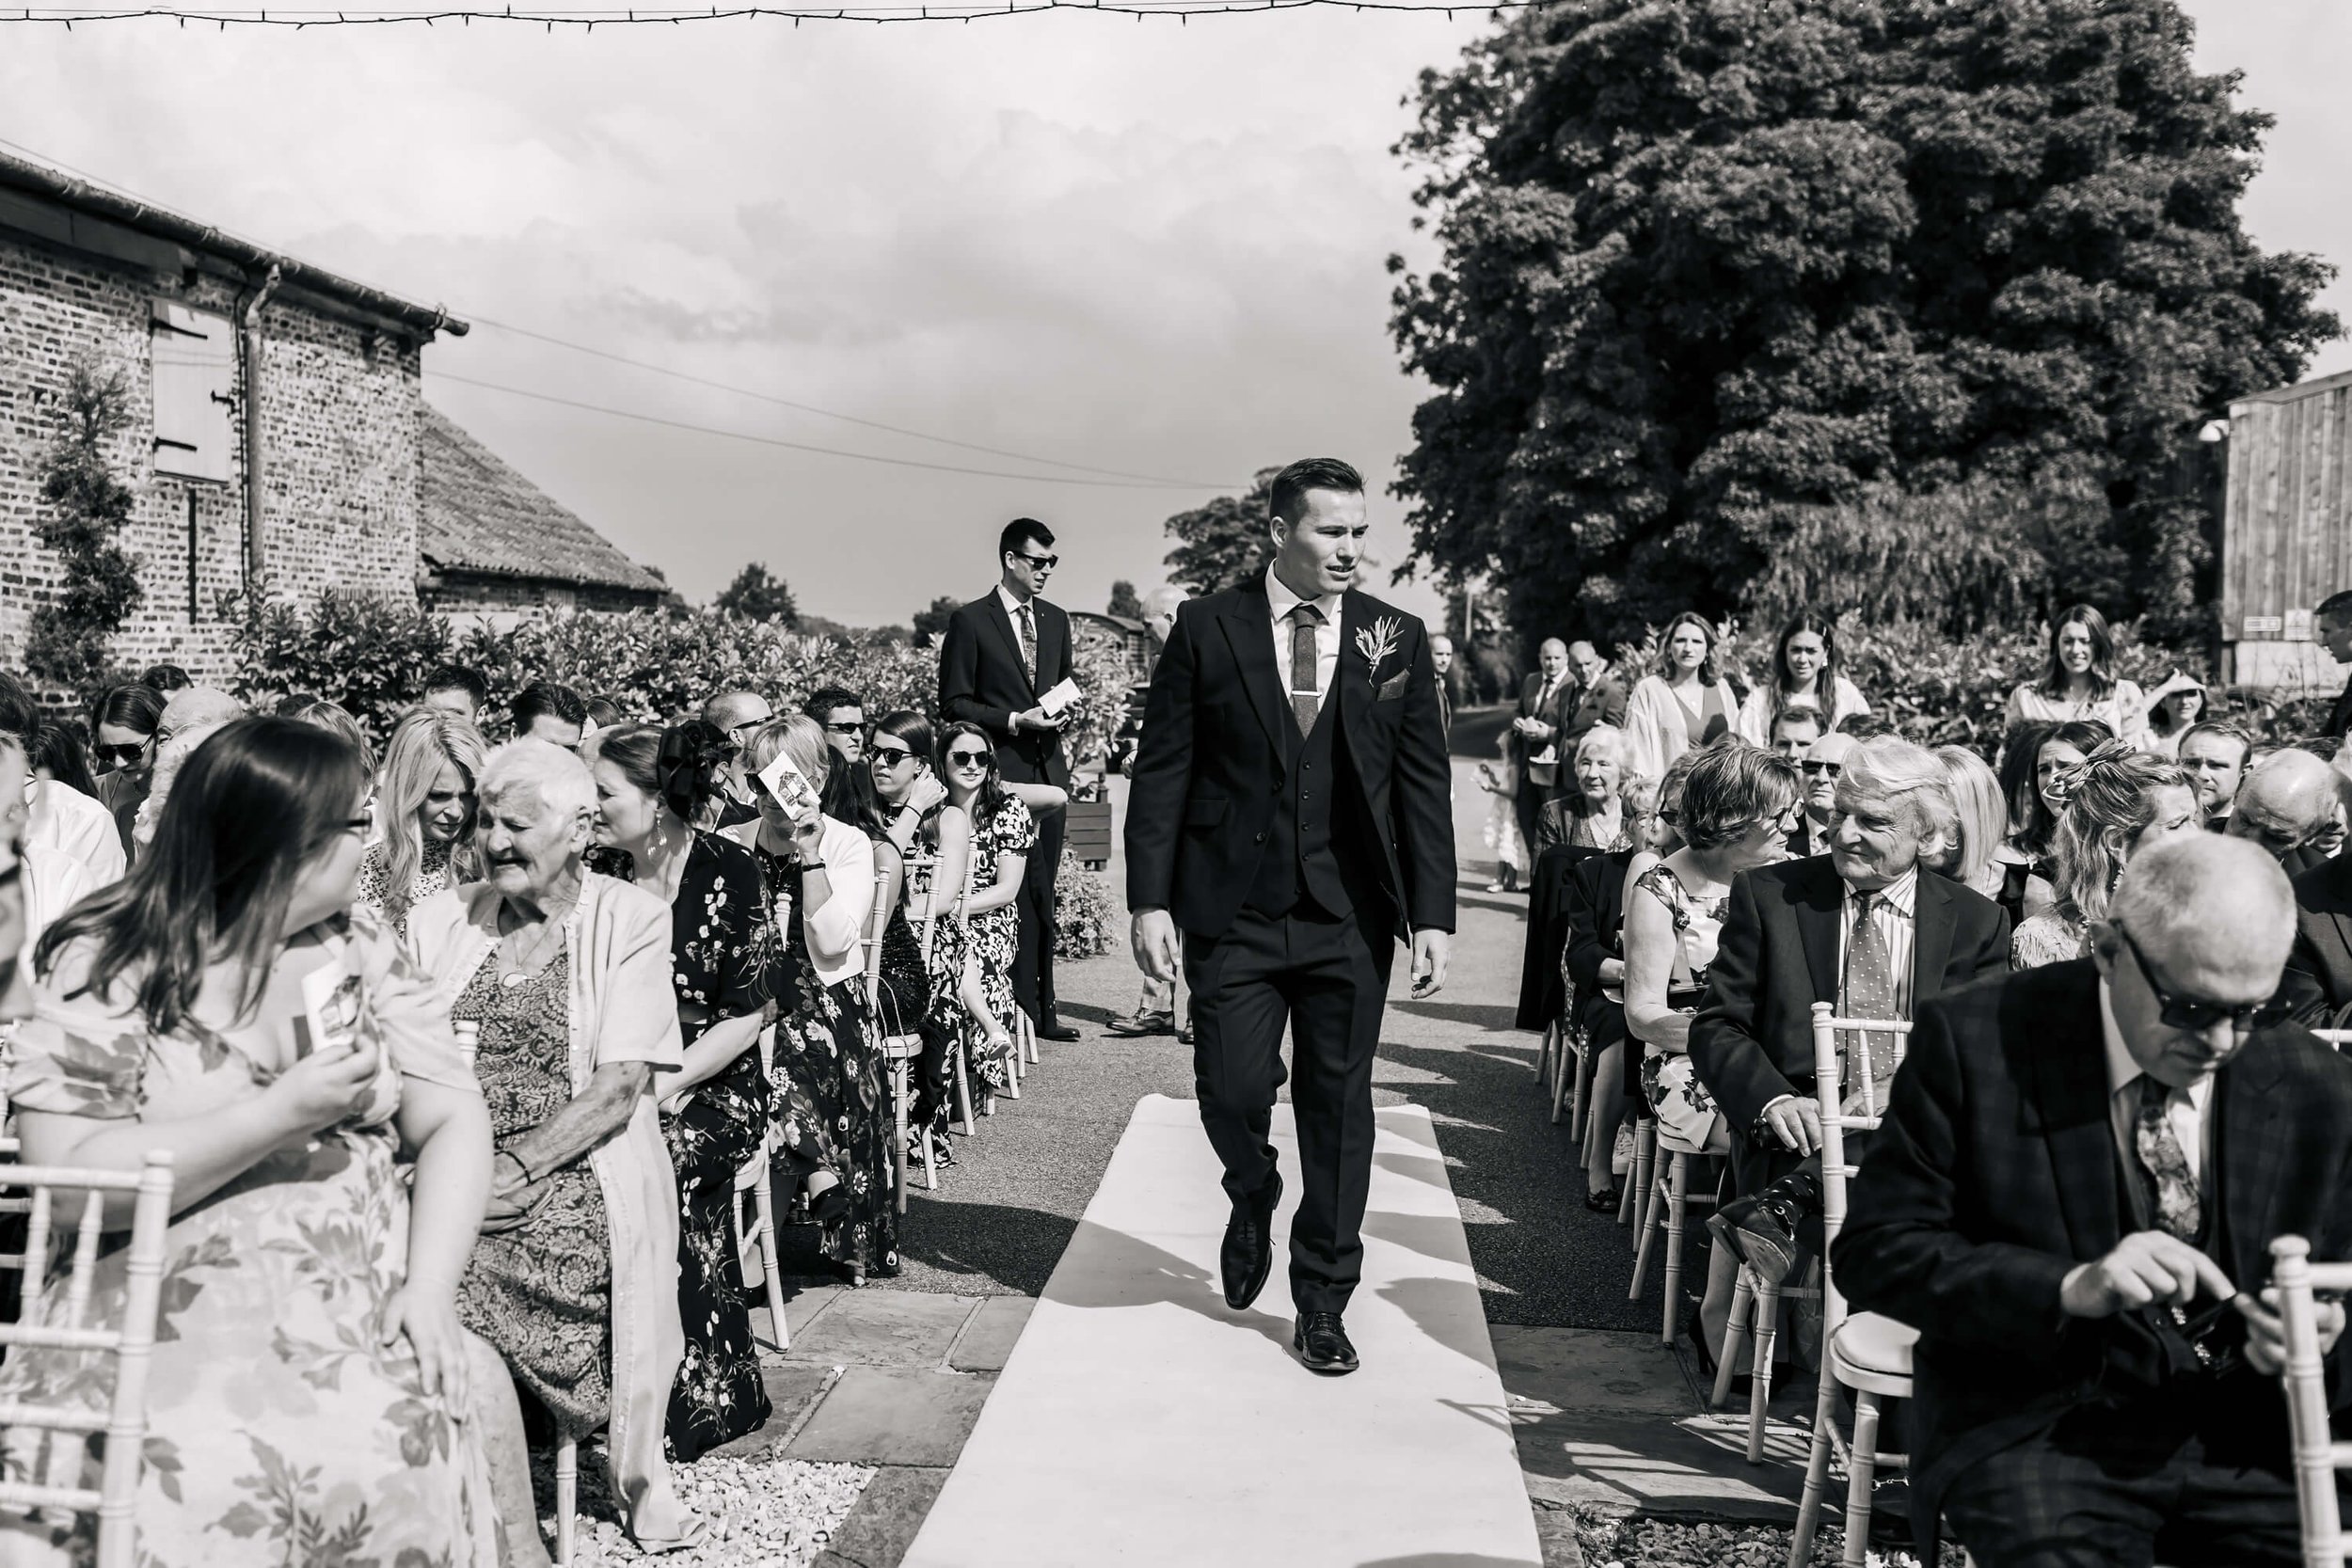 Groom walks down the aisle at his wedding in the sunshine